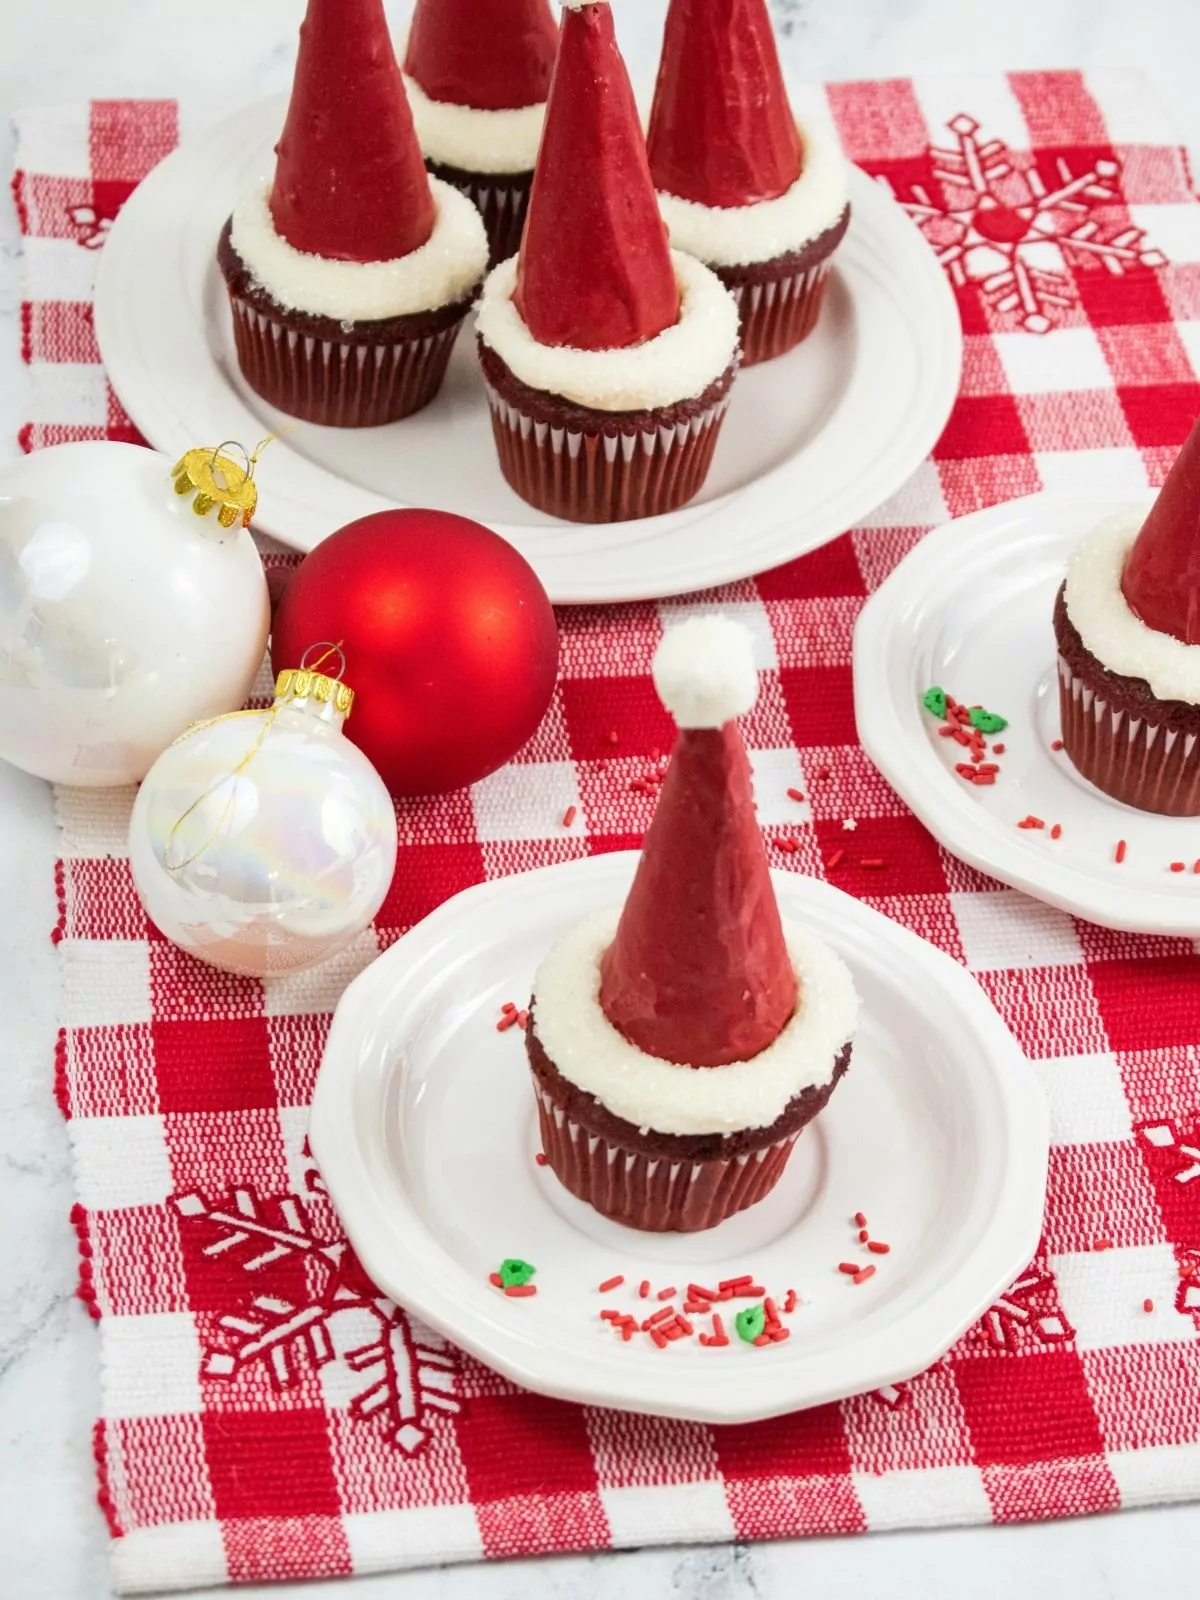 Santa hat cupcakes decorated with Christmas decorations in background.